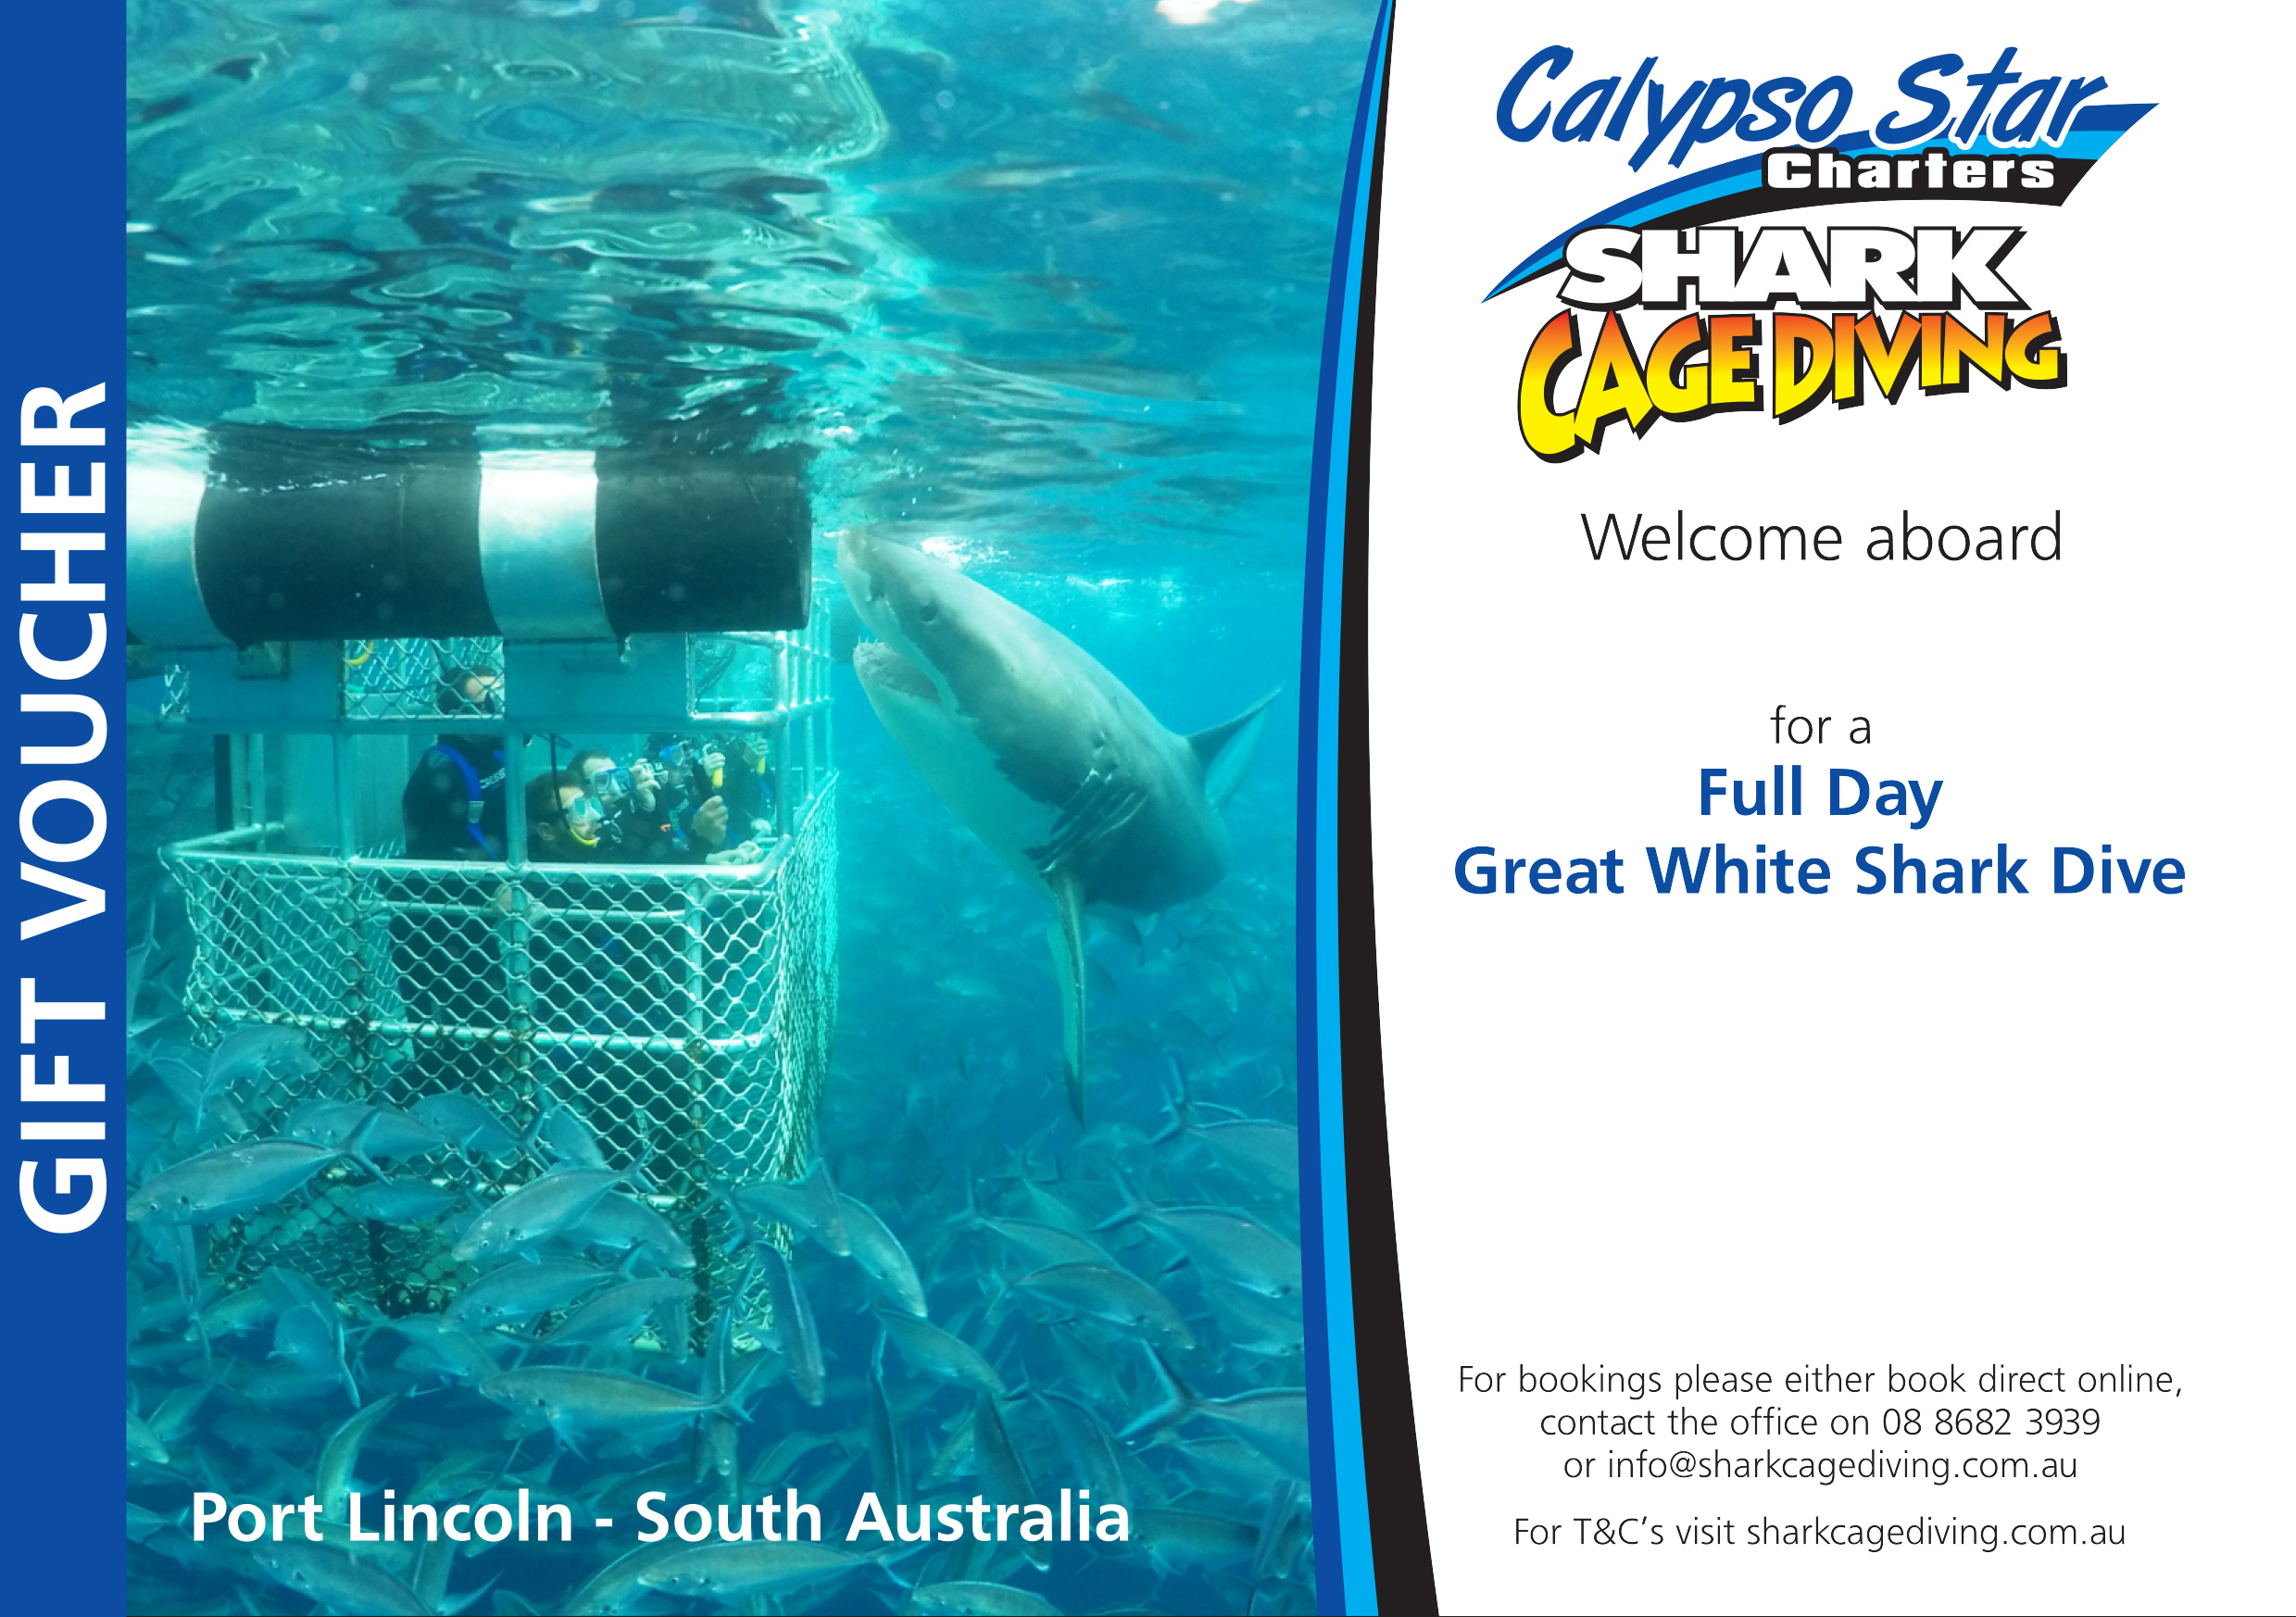 Shark Cage Diving Gift Voucher - Calypso Star Charters Reservations